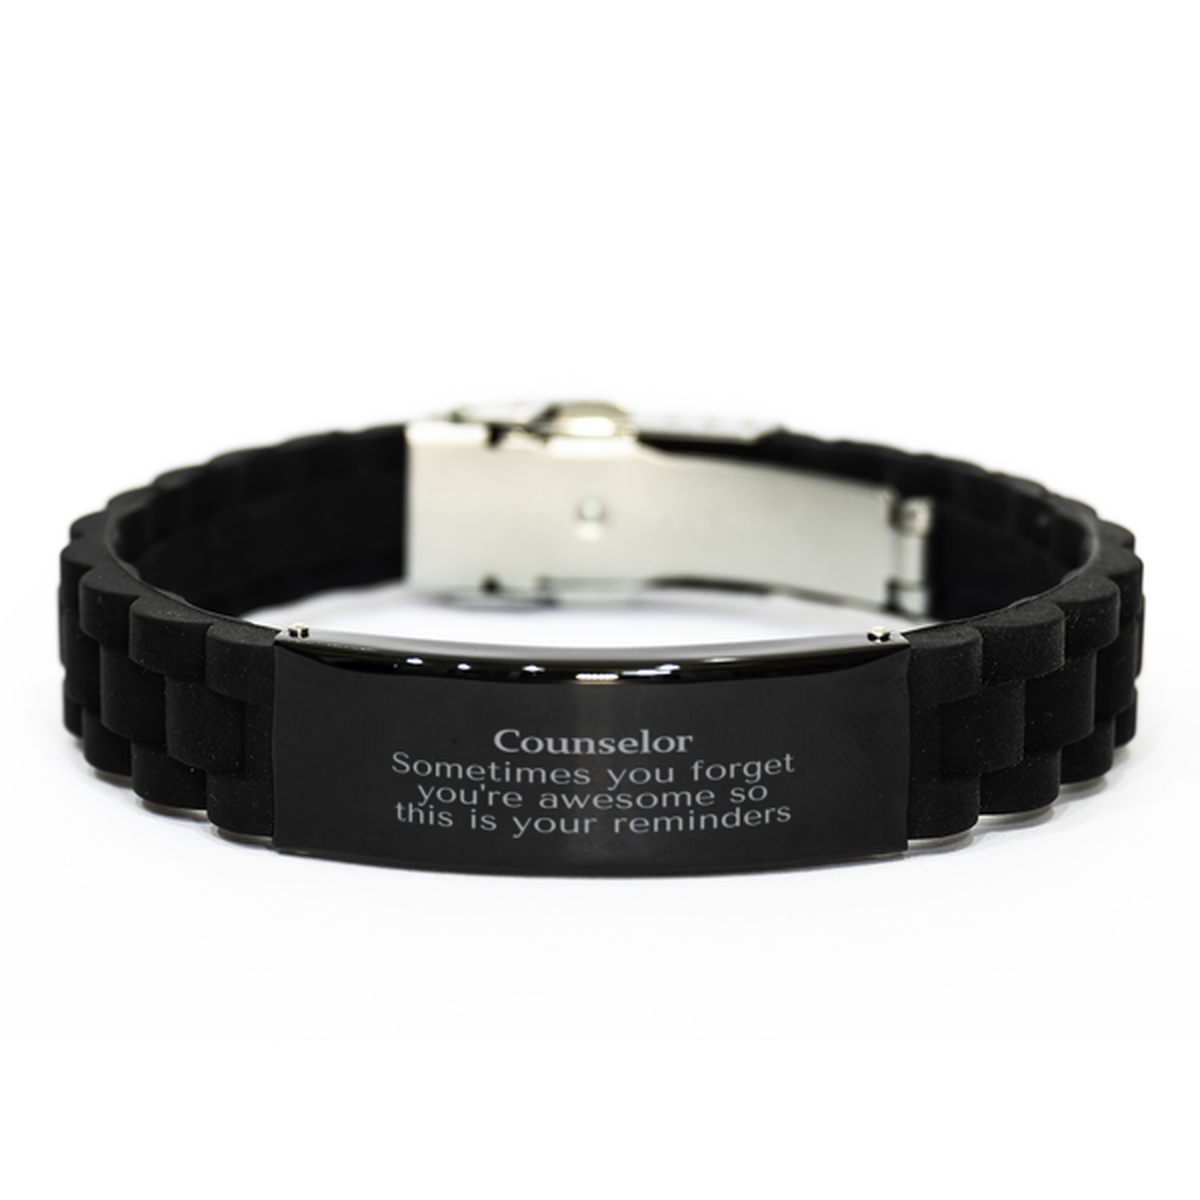 Sentimental Counselor Black Glidelock Clasp Bracelet, Counselor Sometimes you forget you're awesome so this is your reminders, Graduation Christmas Birthday Gifts for Counselor, Men, Women, Coworkers